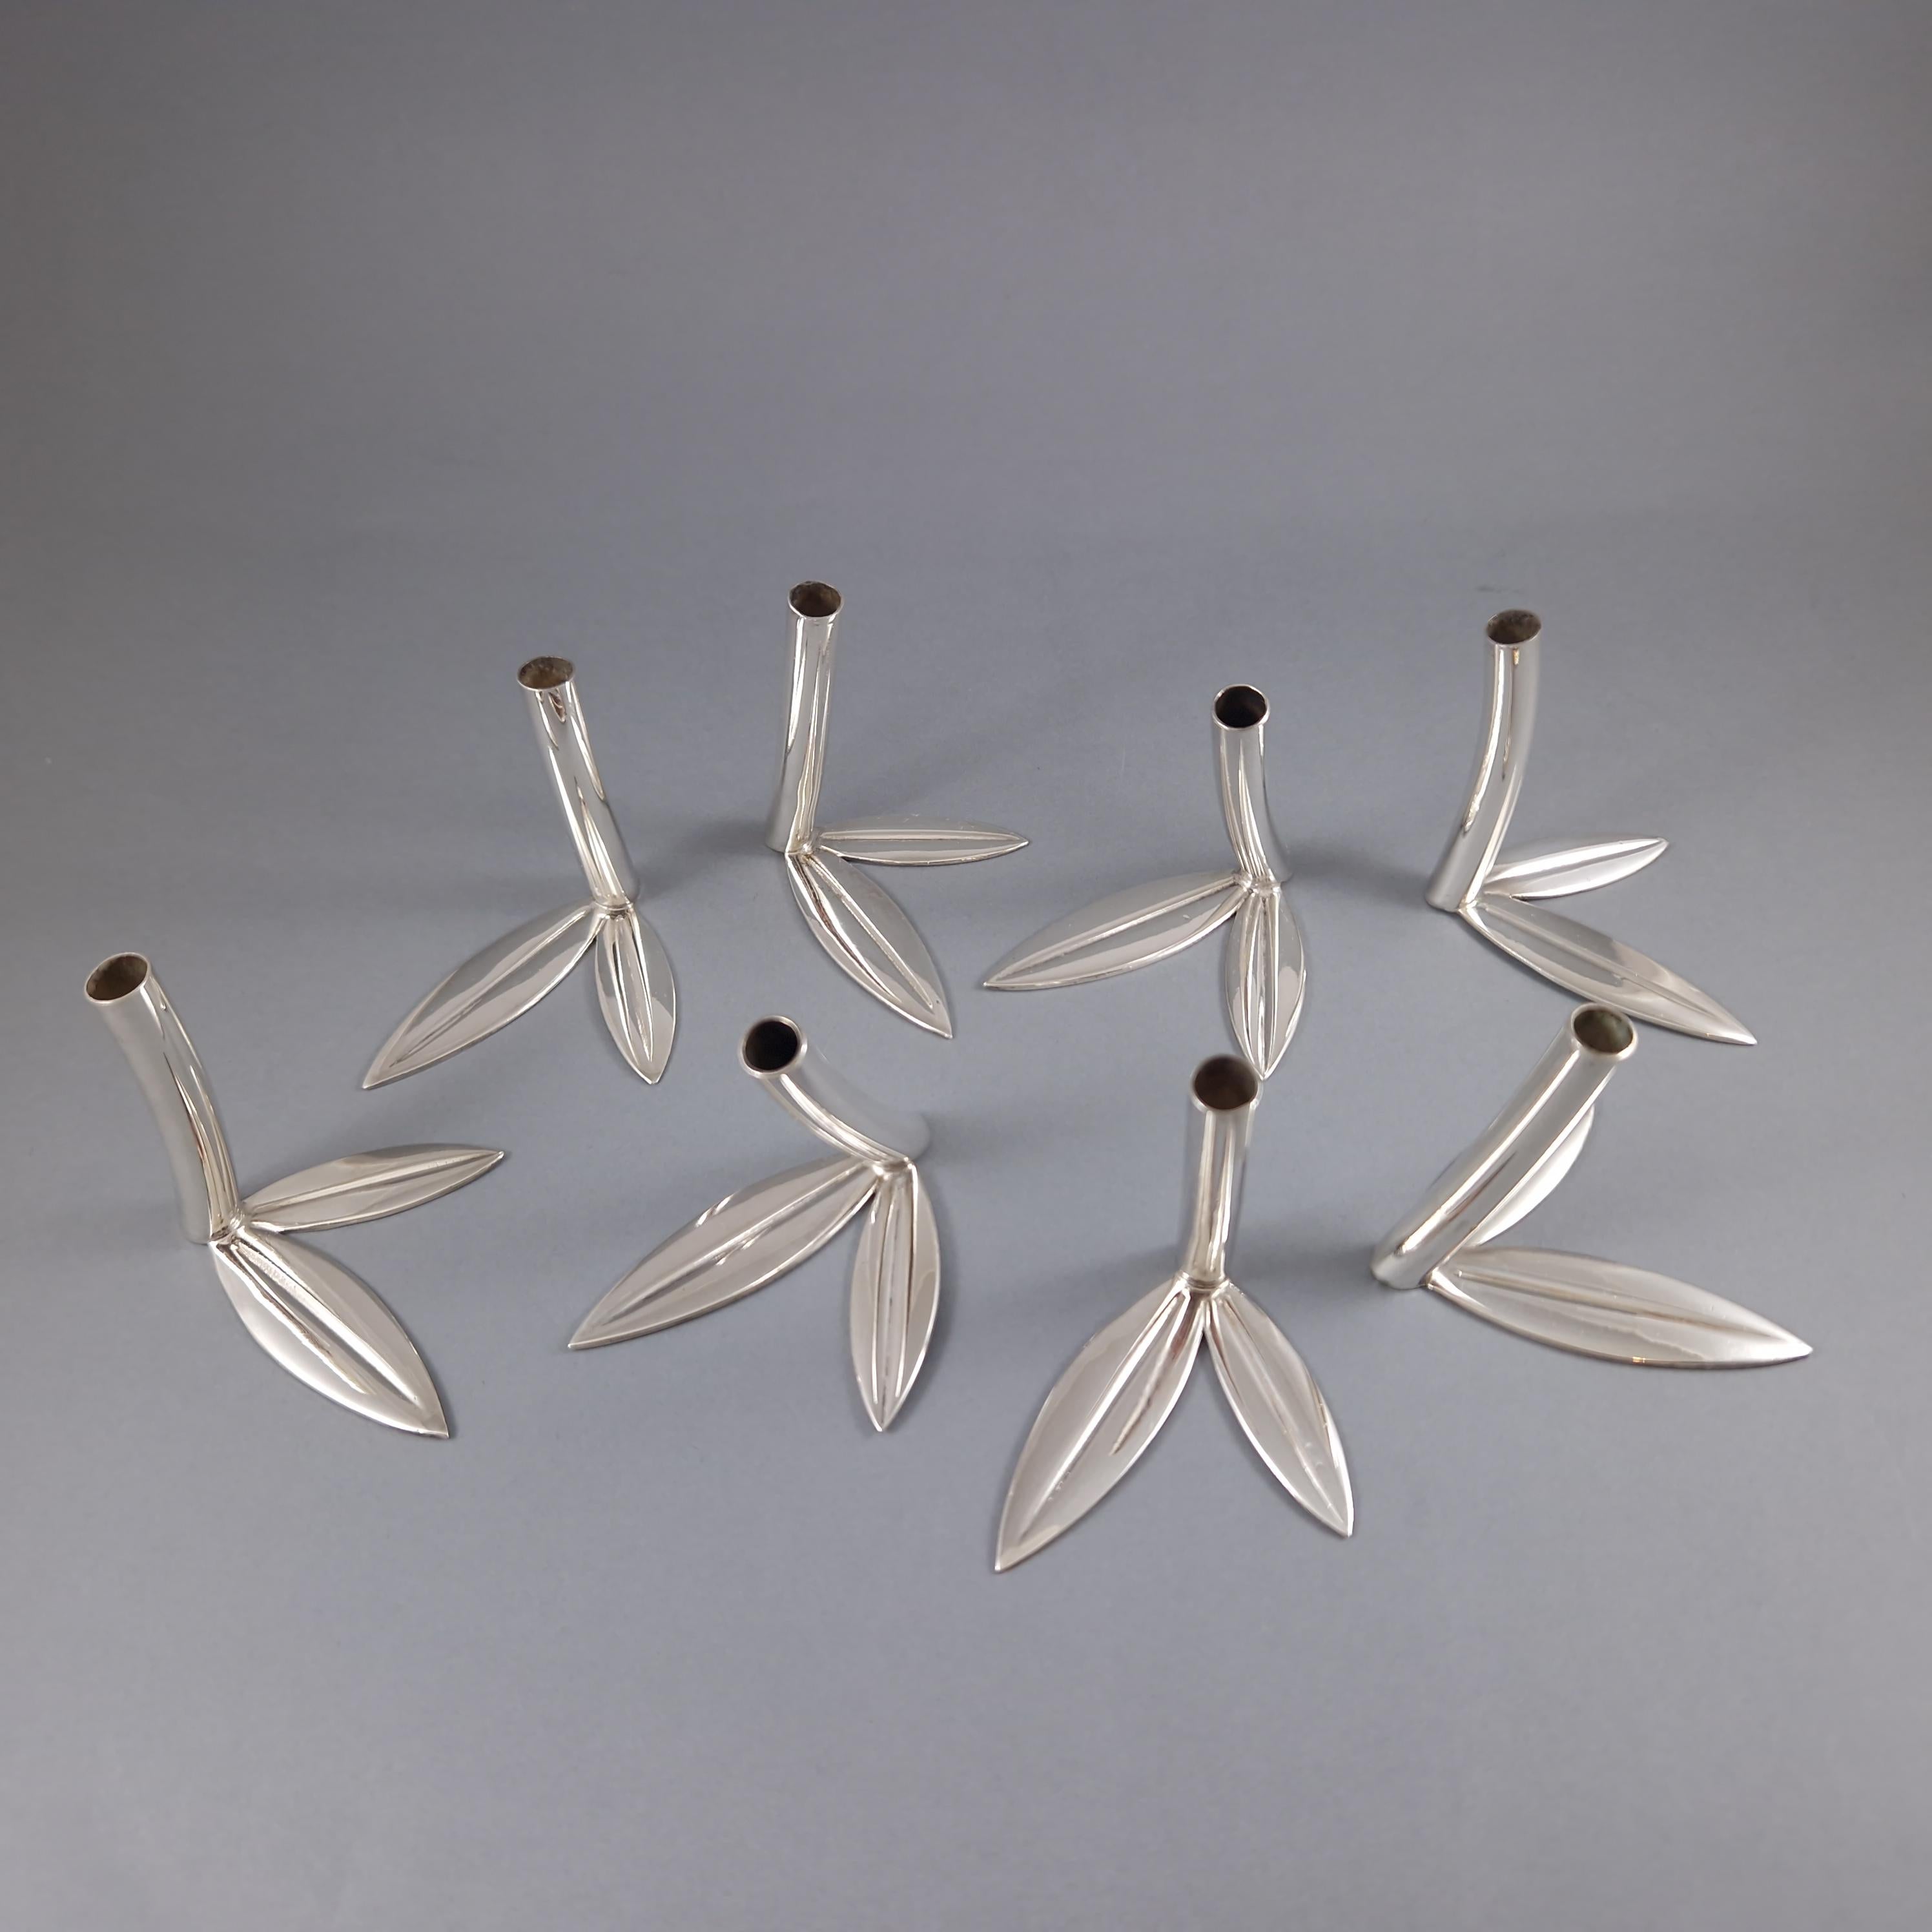 Set of eight bouquet flowers holders in Sterling Silver in the shape of a branch and leaves 
925 Silver hallmark
Length: 7.2 cm 
Height: 6.4 cm 
Weight: 269 grams
